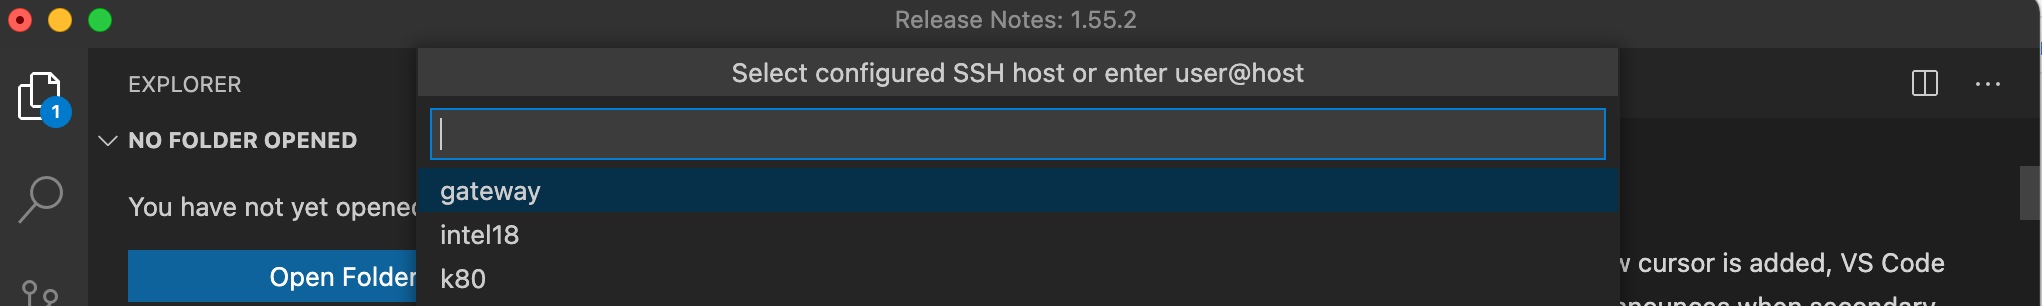 Screenshot of the VS Code SSH host selection box showing gateway, intel18 and k80